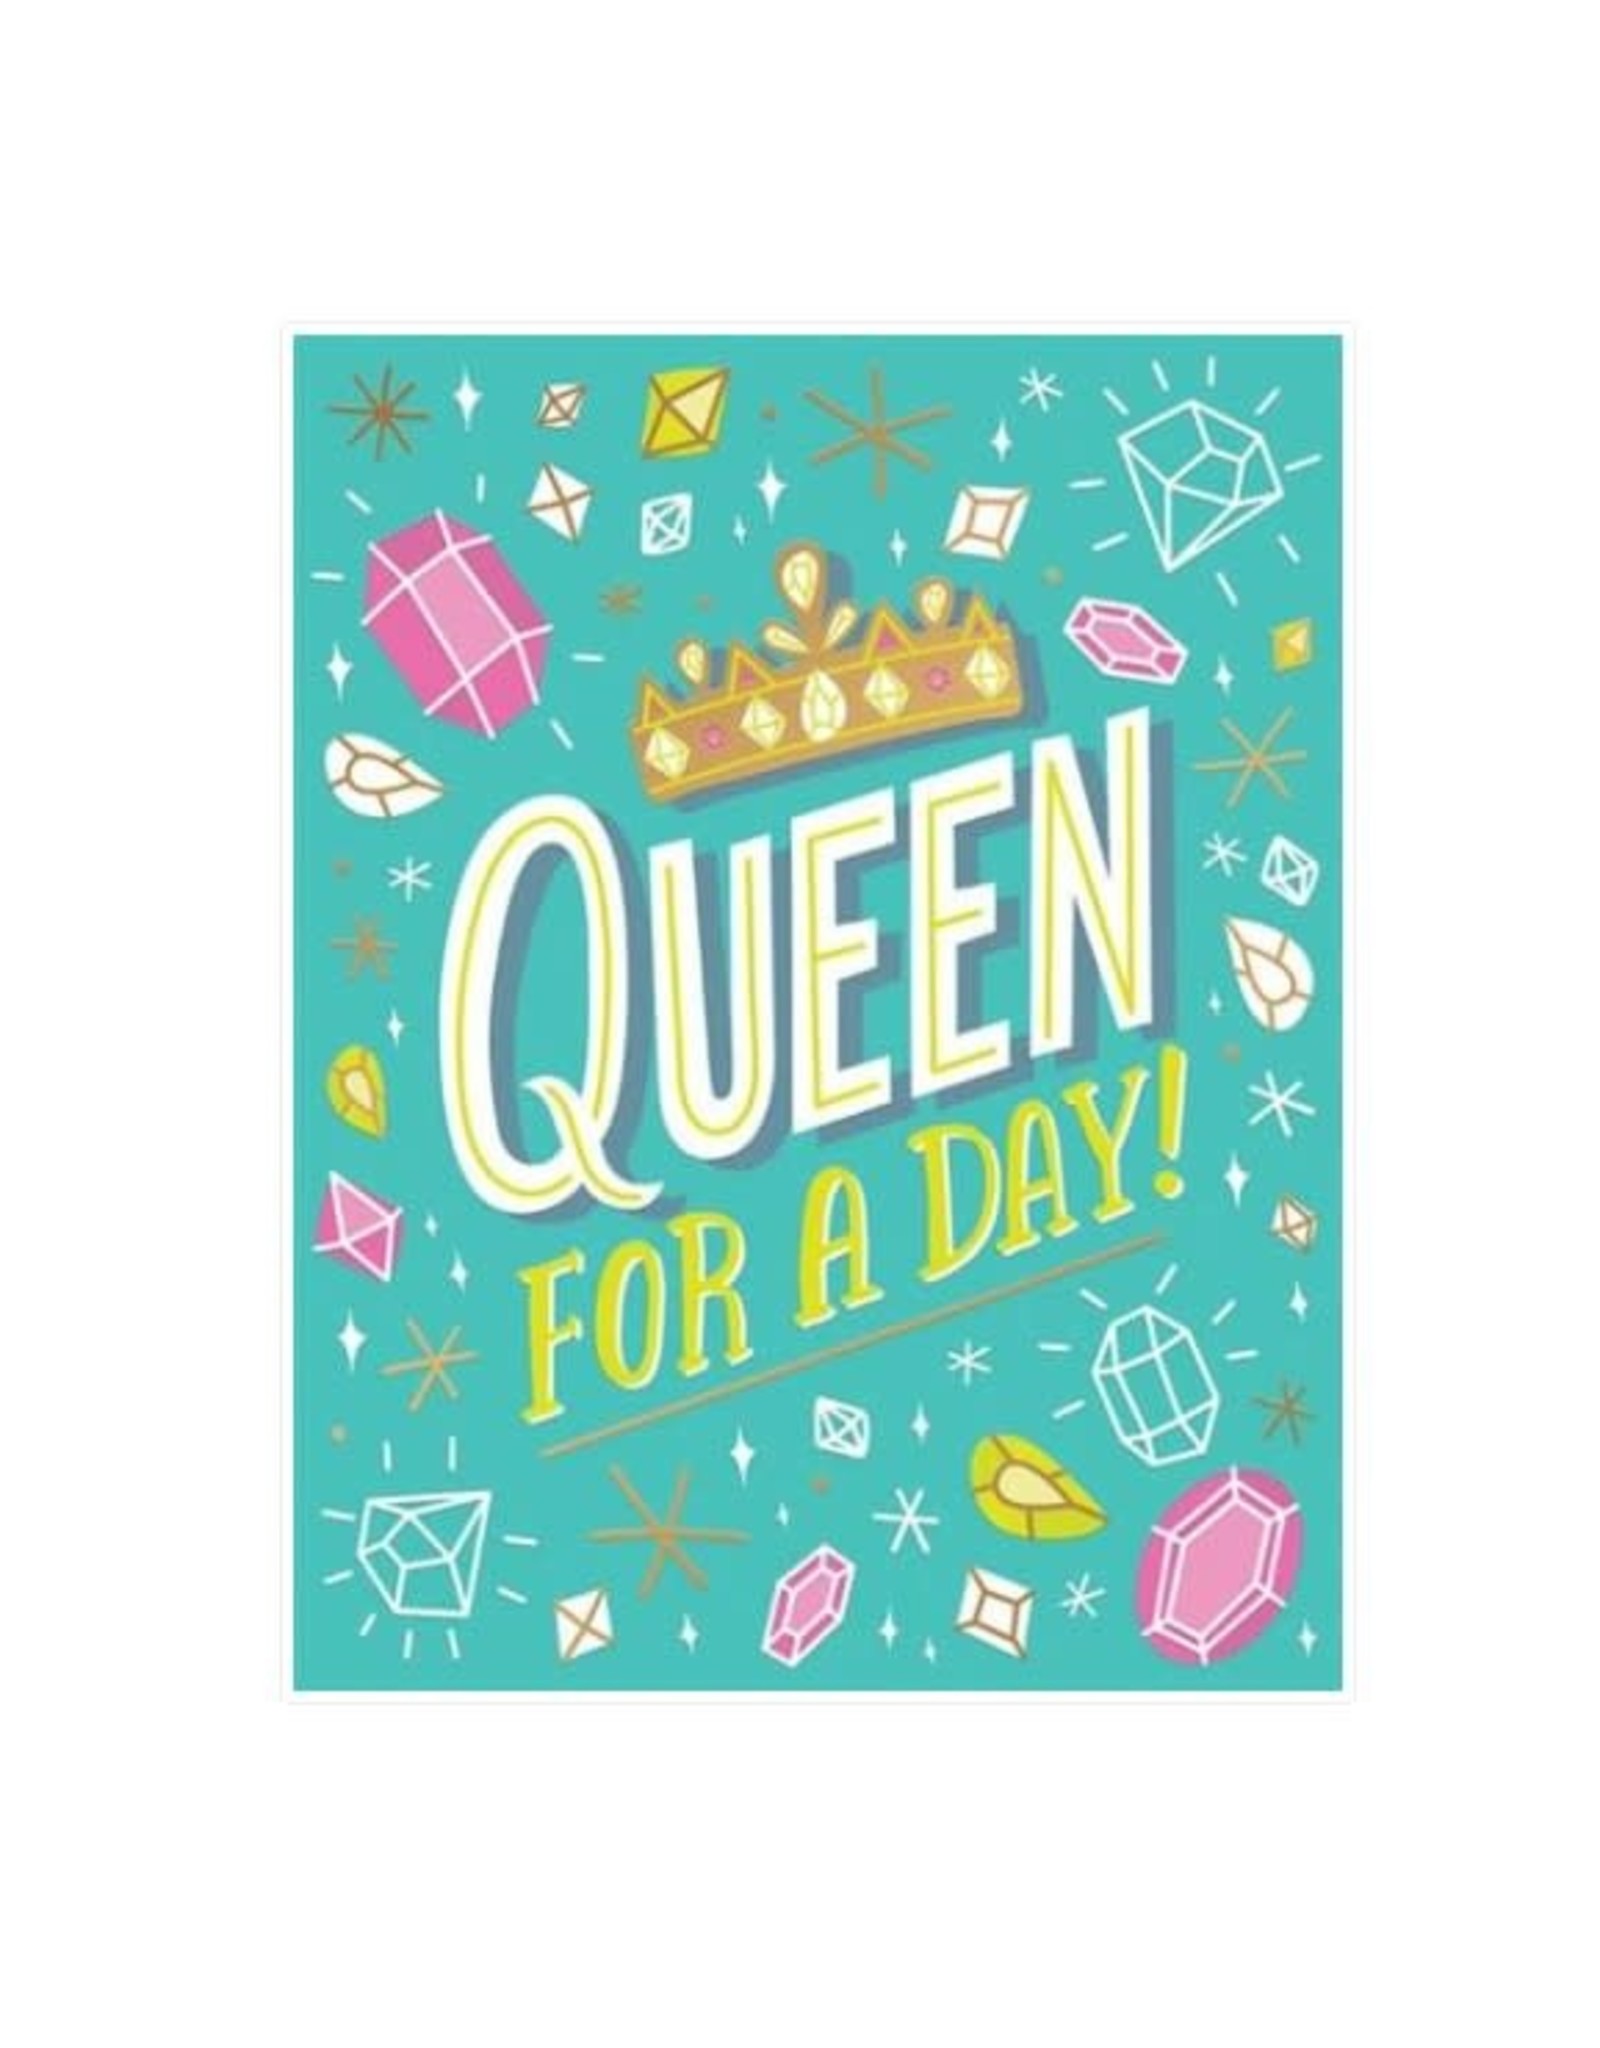 Queen for the Day Greeting Card